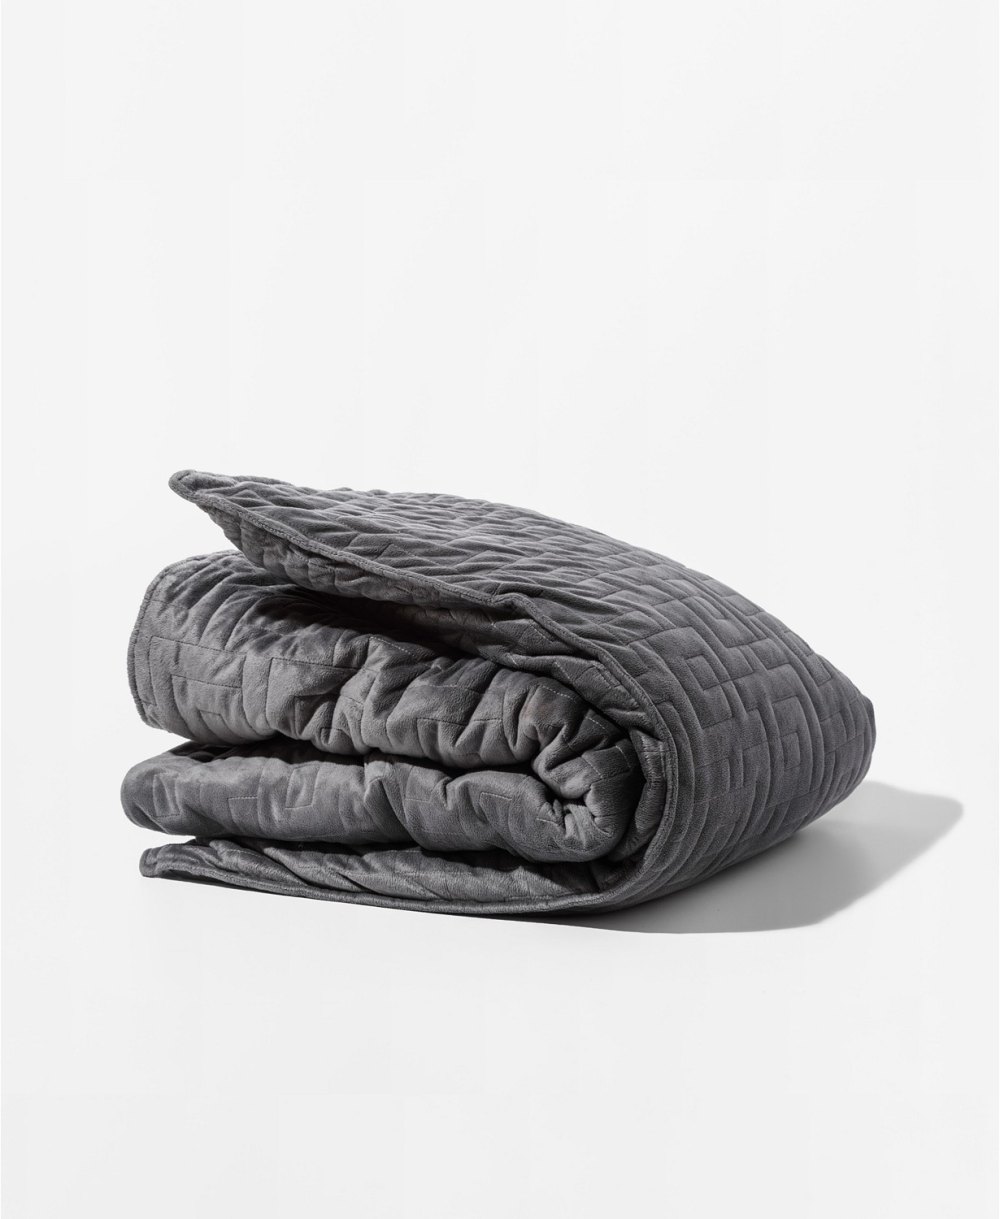 Today Only! This Incredible Weighted Blanket Is 70% Off at Macy’s